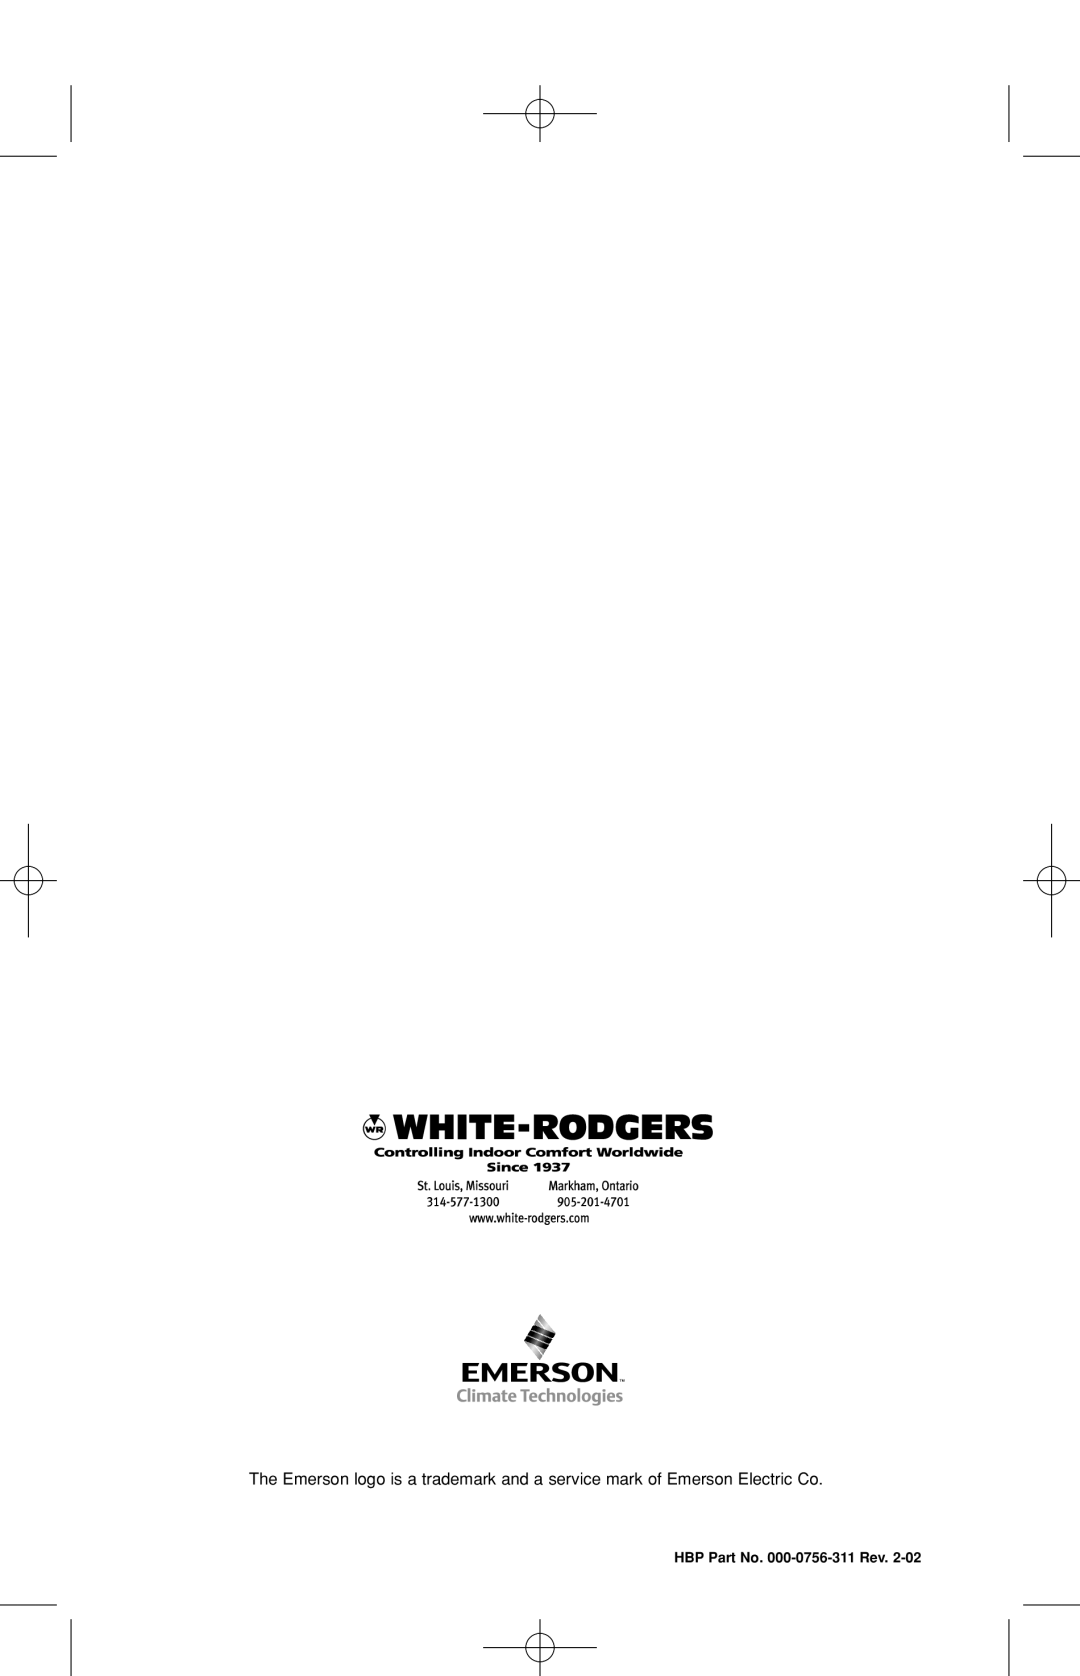 White Rodgers HDT2600 owner manual HBP Part No. 000-0756-311Rev 